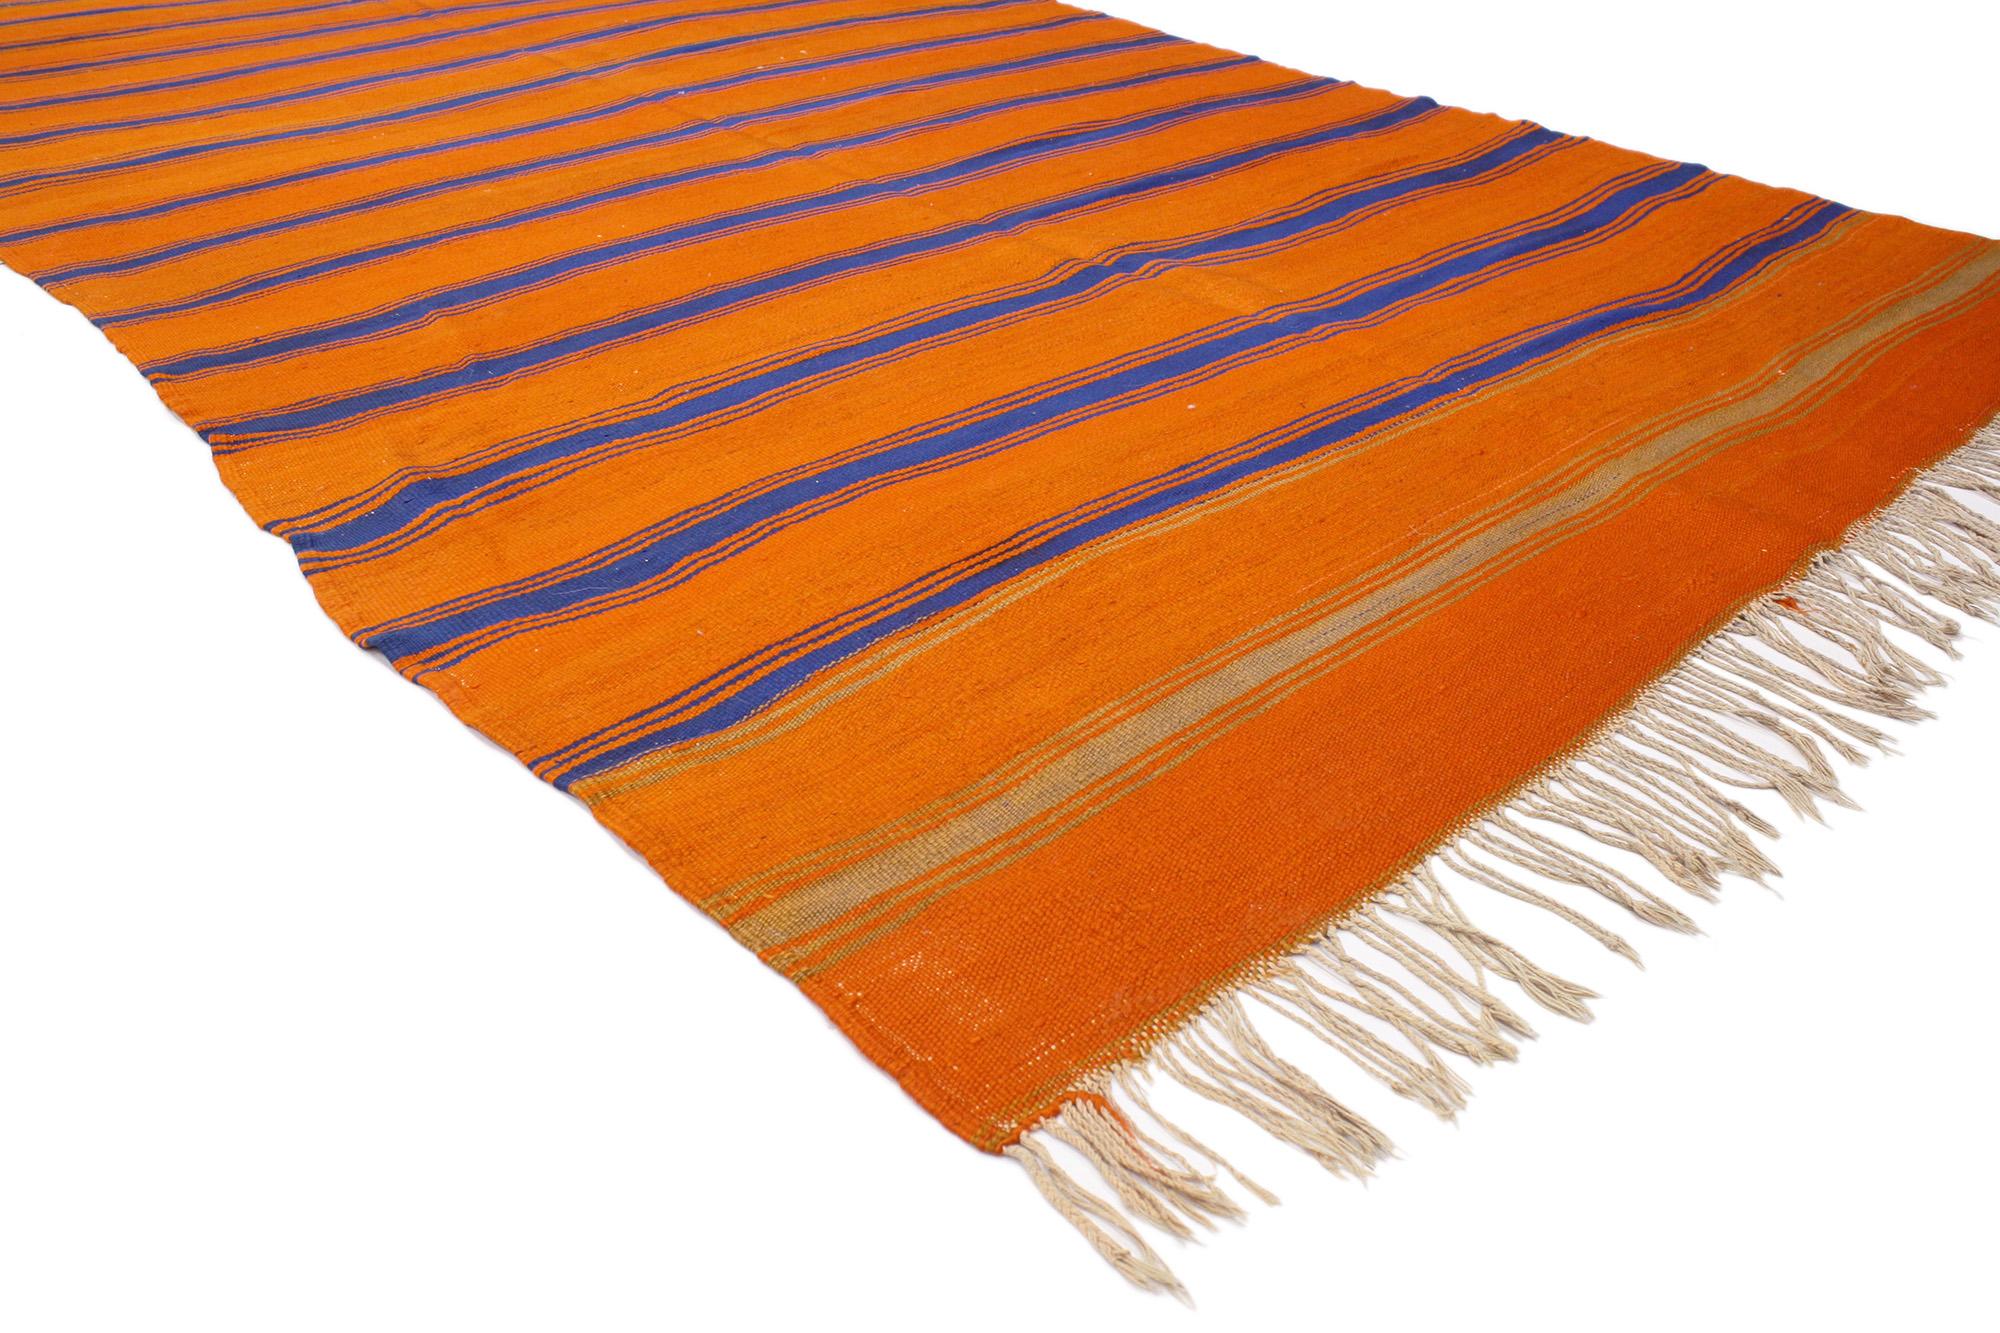 20537 Vintage Berber Moroccan Striped Kilim Rug, 05'07 x 12'01. Moroccan kilim rugs, crafted by diverse tribes and artisans across Morocco, are traditional handwoven flatweave rugs renowned for their intricate designs and patterns. These rugs, made